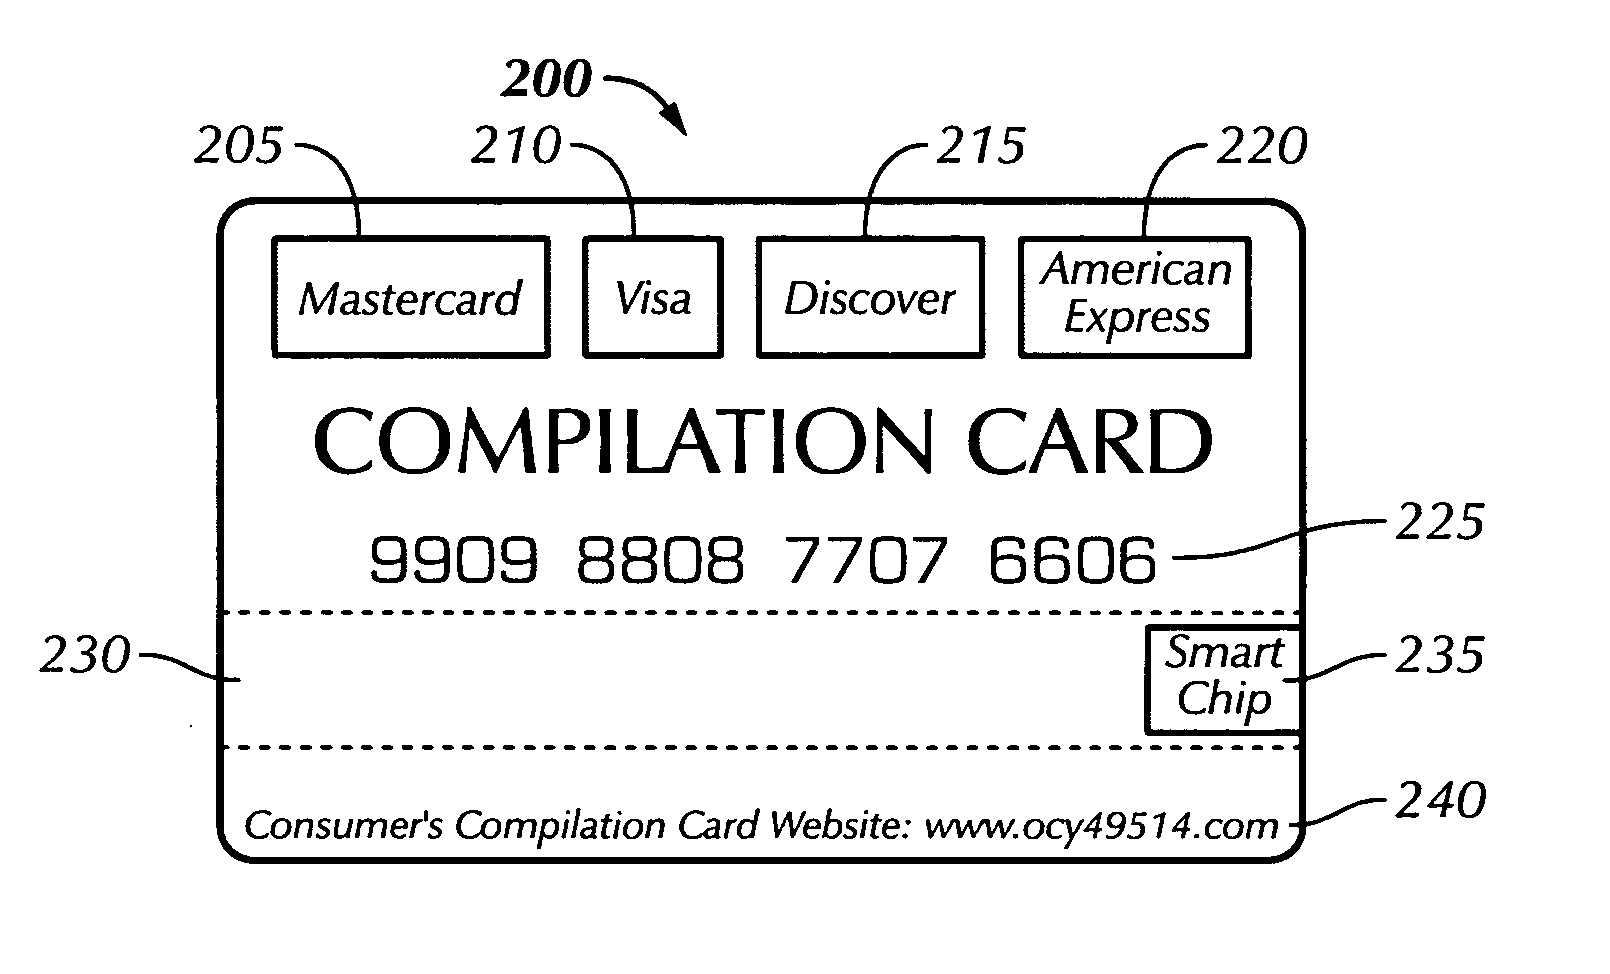 Method and apparatus for monetizing personal consumer profiles by aggregating a plurality of consumer credit card accounts into one card